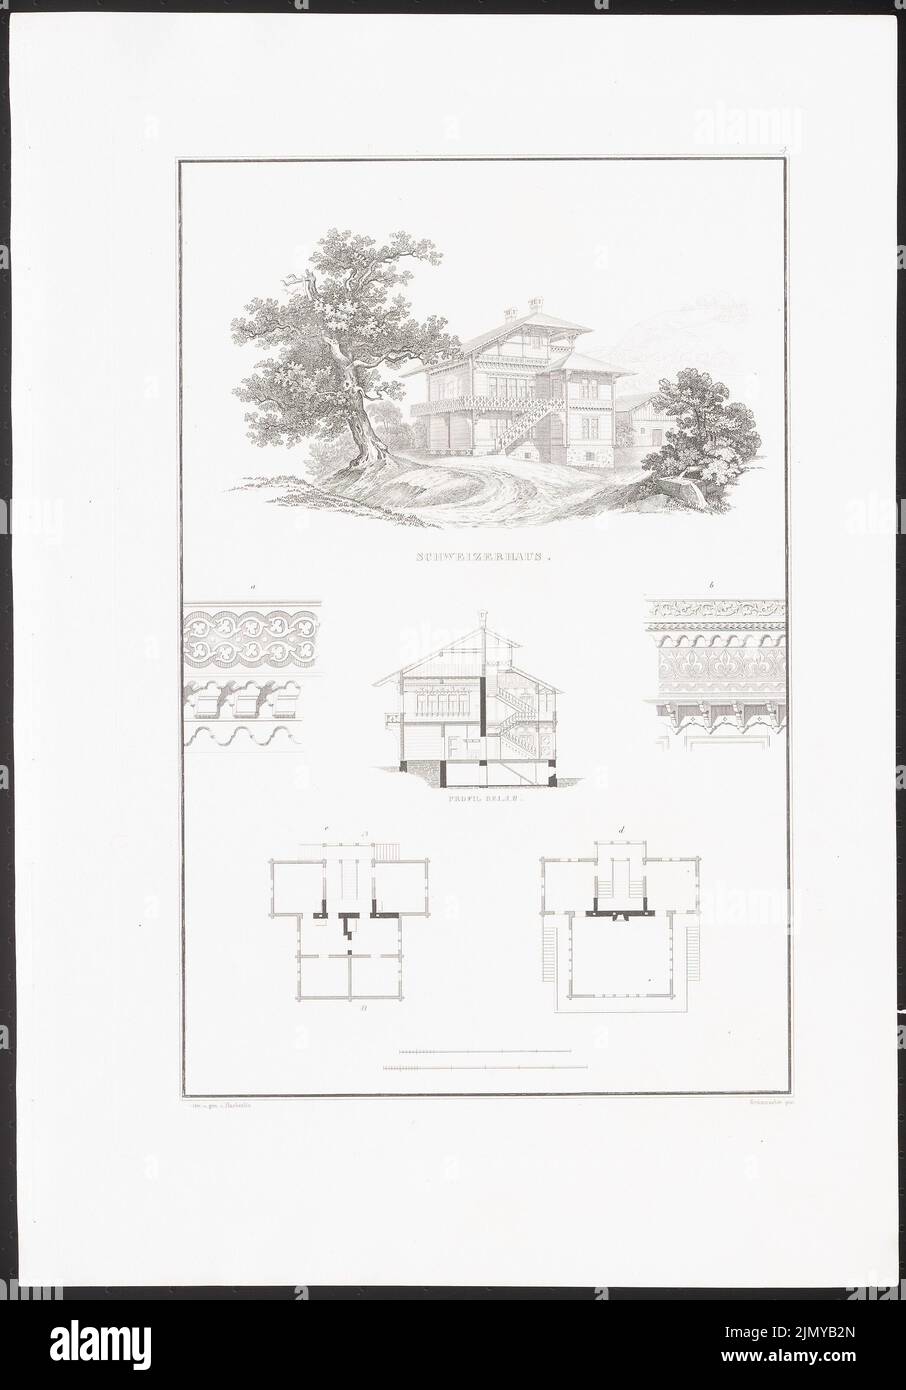 Haeberlin Joh. Heinrich (1799-1867), Schweizerhaus. (From: Architectural designs from the collection of the architectural association in Berlin, H.1 U.2, Potsdam 1837.) (1837-1837): floor plans, perspective view, cross-section, details. Stitch on paper, 49.4 x 34.4 cm (including scan edges) Stock Photo